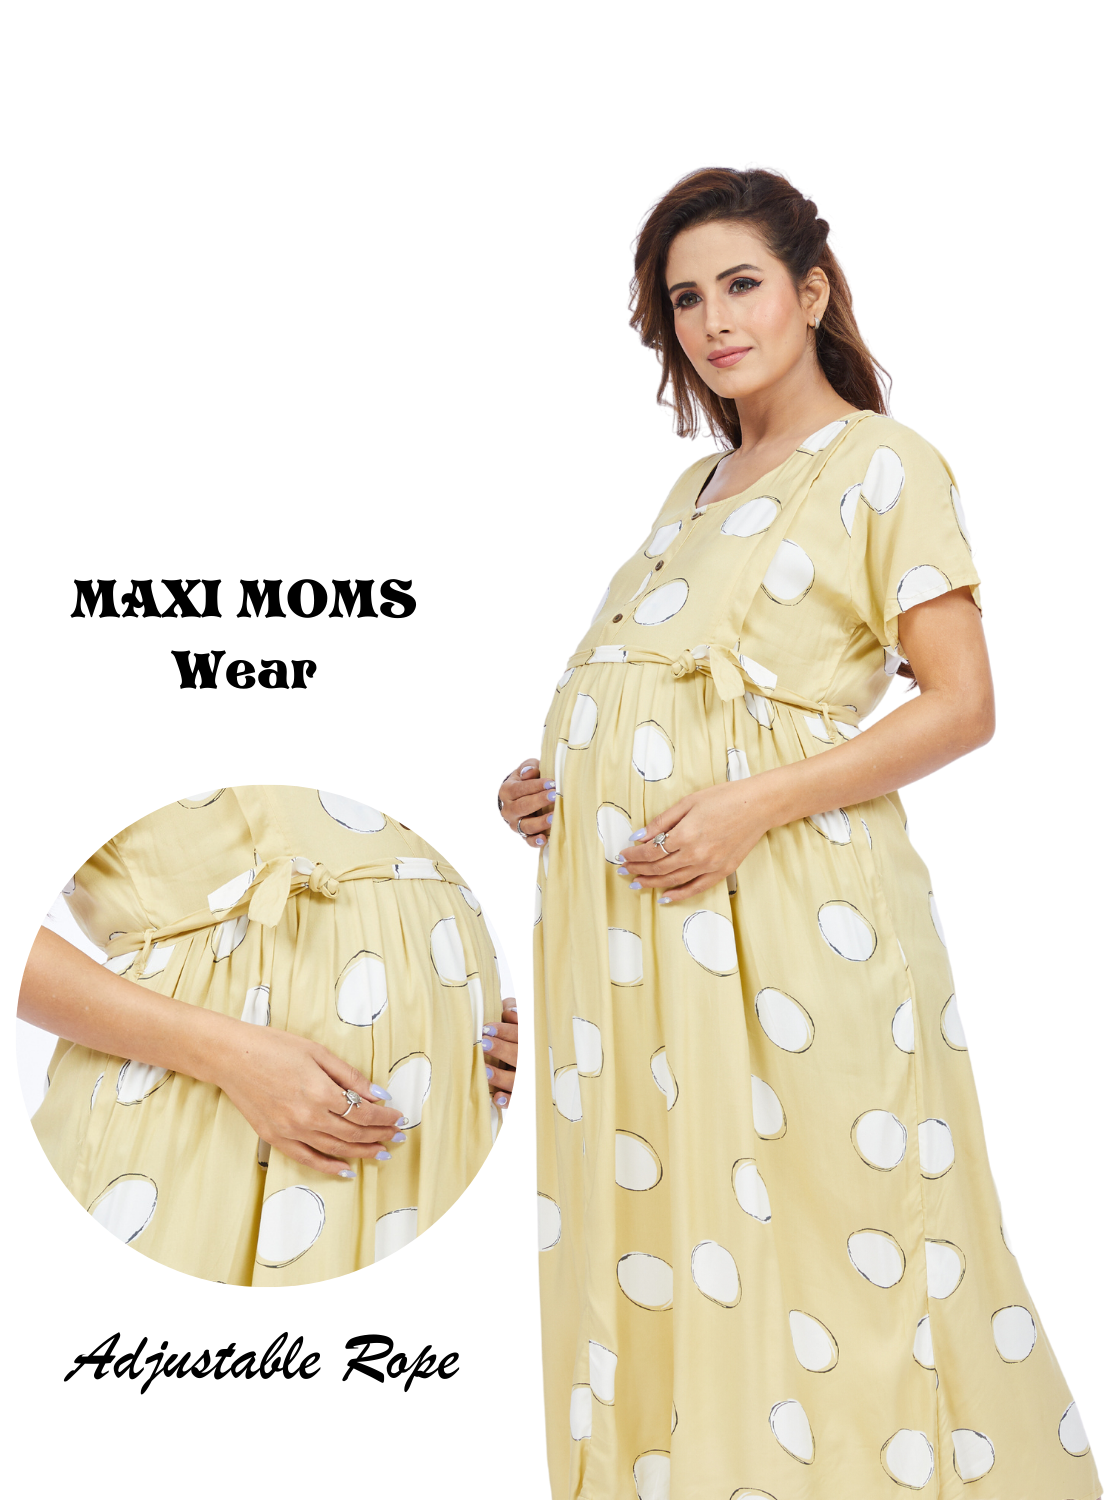 New Arrivals New ONLY MINE Premium MAXI Mom's Wear | Invisible Feeding Zipper | Adjustable Rope | Casual Wear | Pregnancy Wear